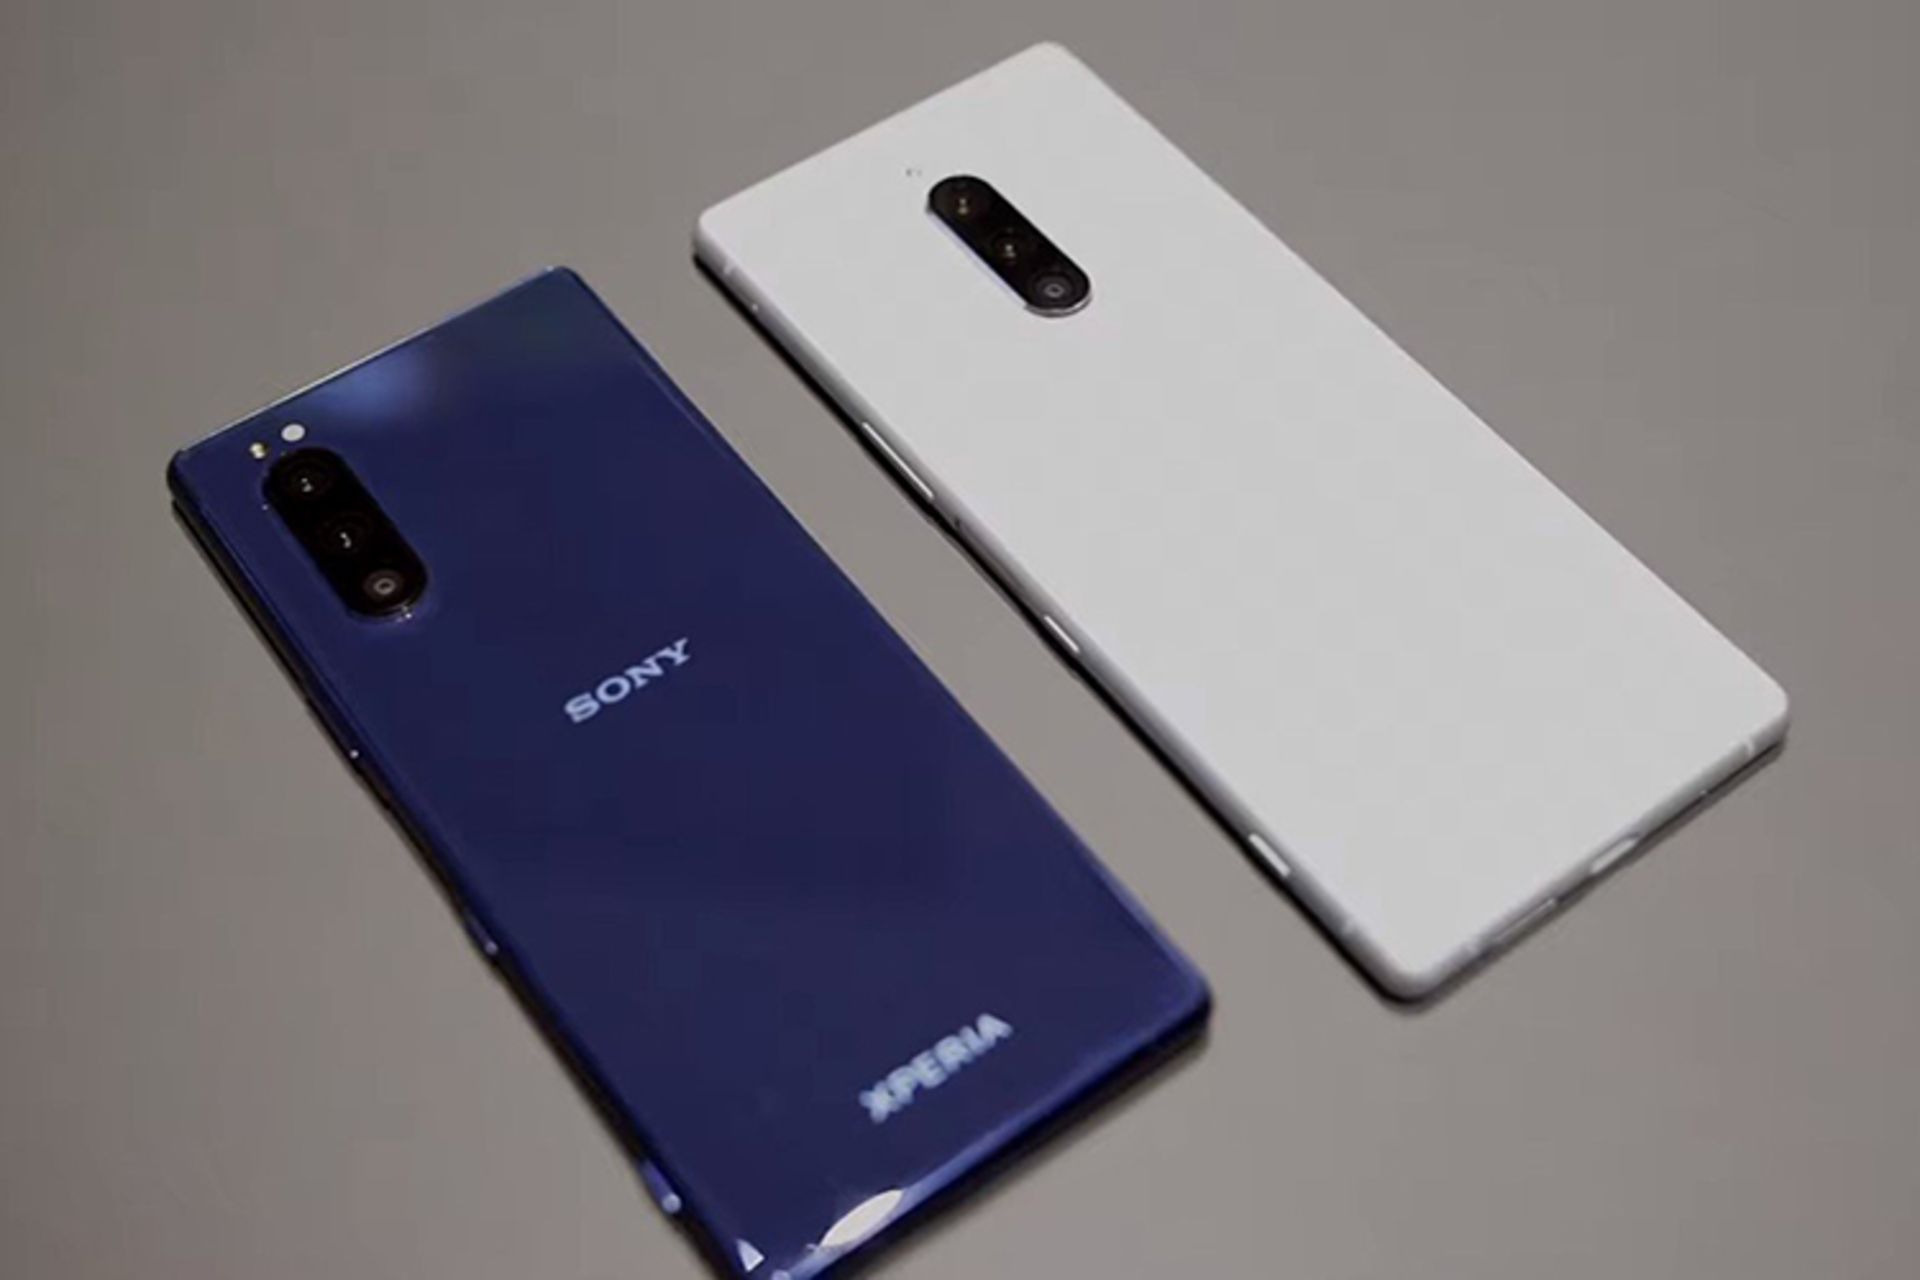 xperia1 and 5